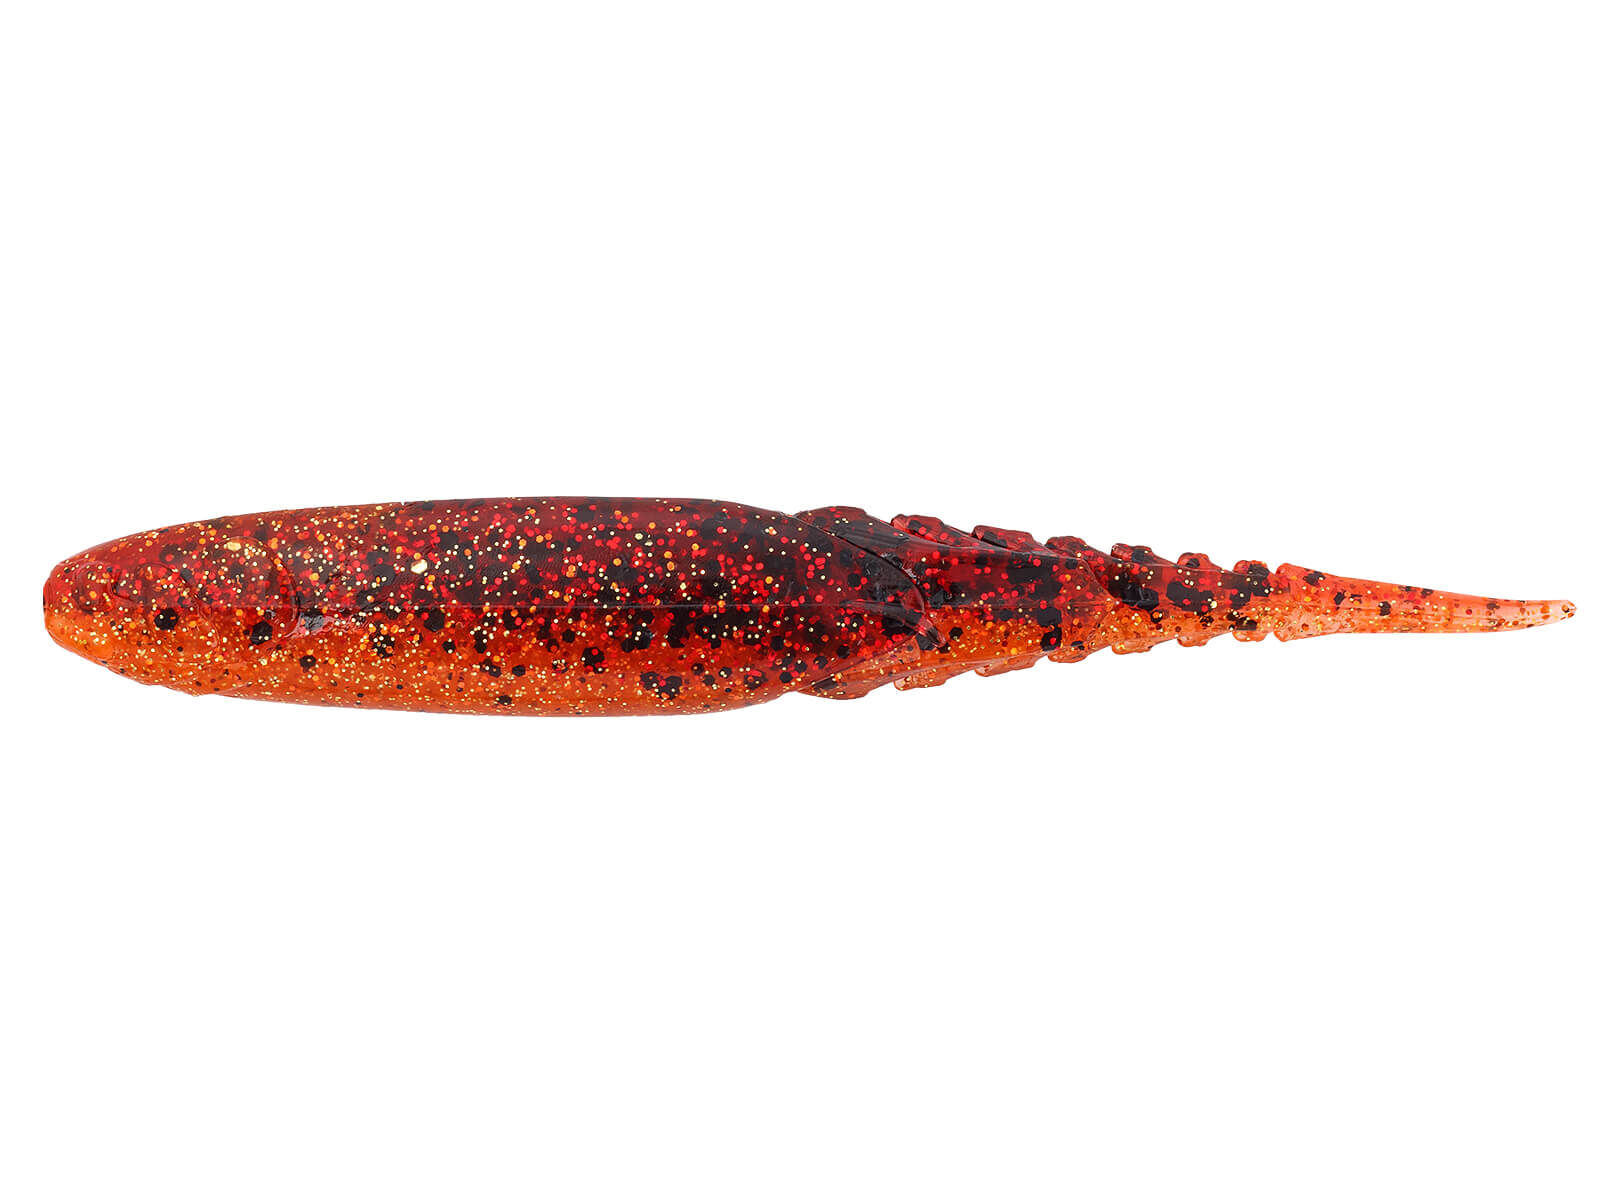 4.5" Chatterspike - Fire Craw